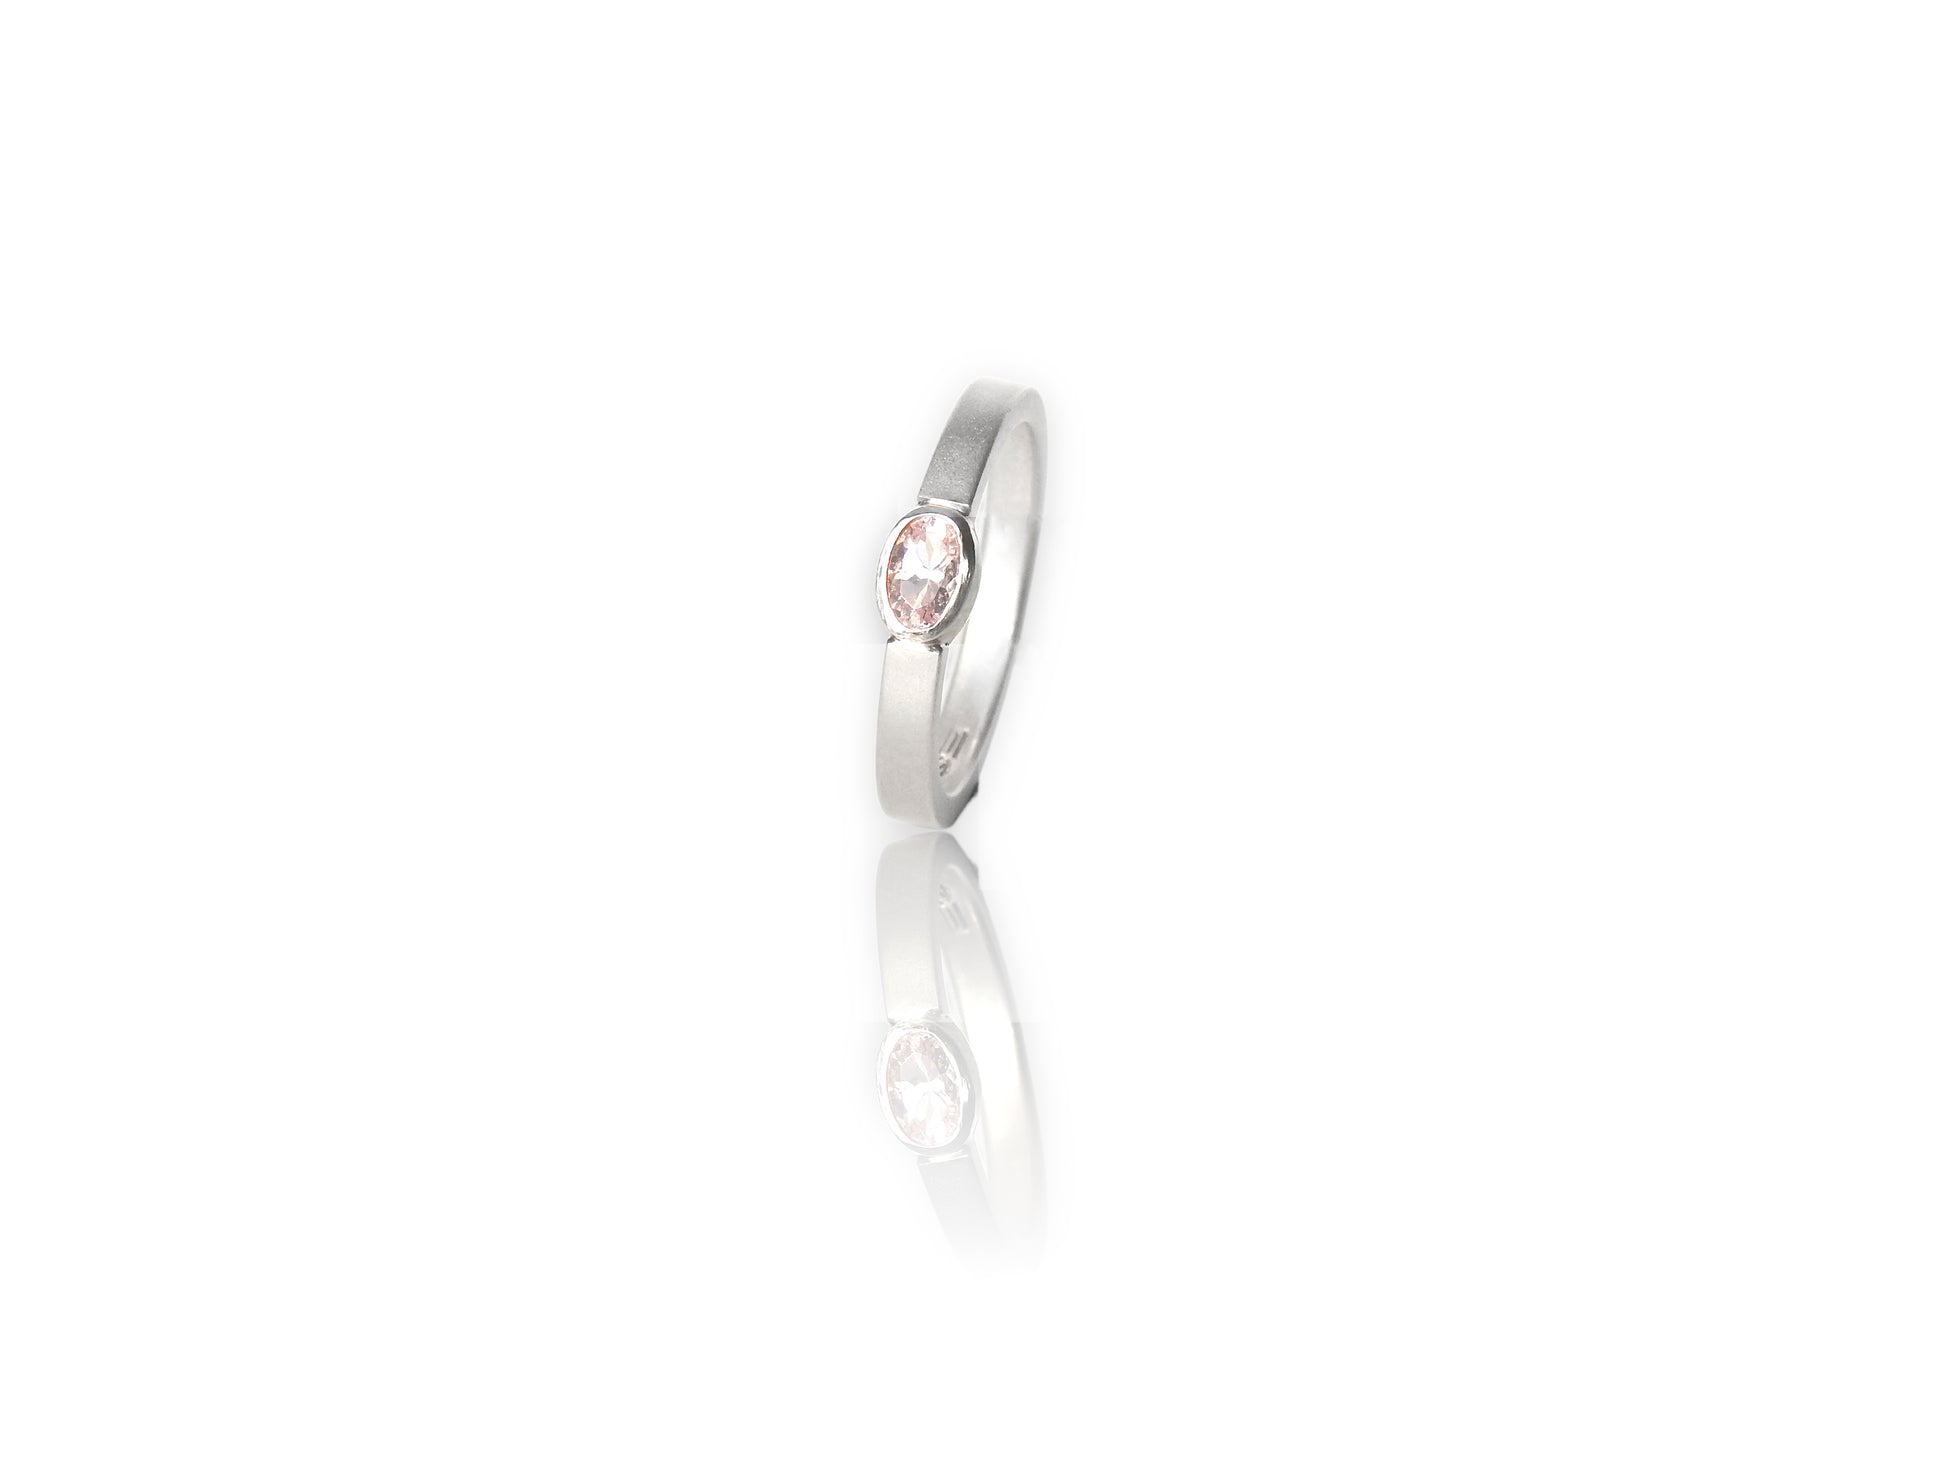 Floating Bezel ~ lovely clean flush bezel setting in band  in sterling silver with 3x5 oval morganite facetted stone. 